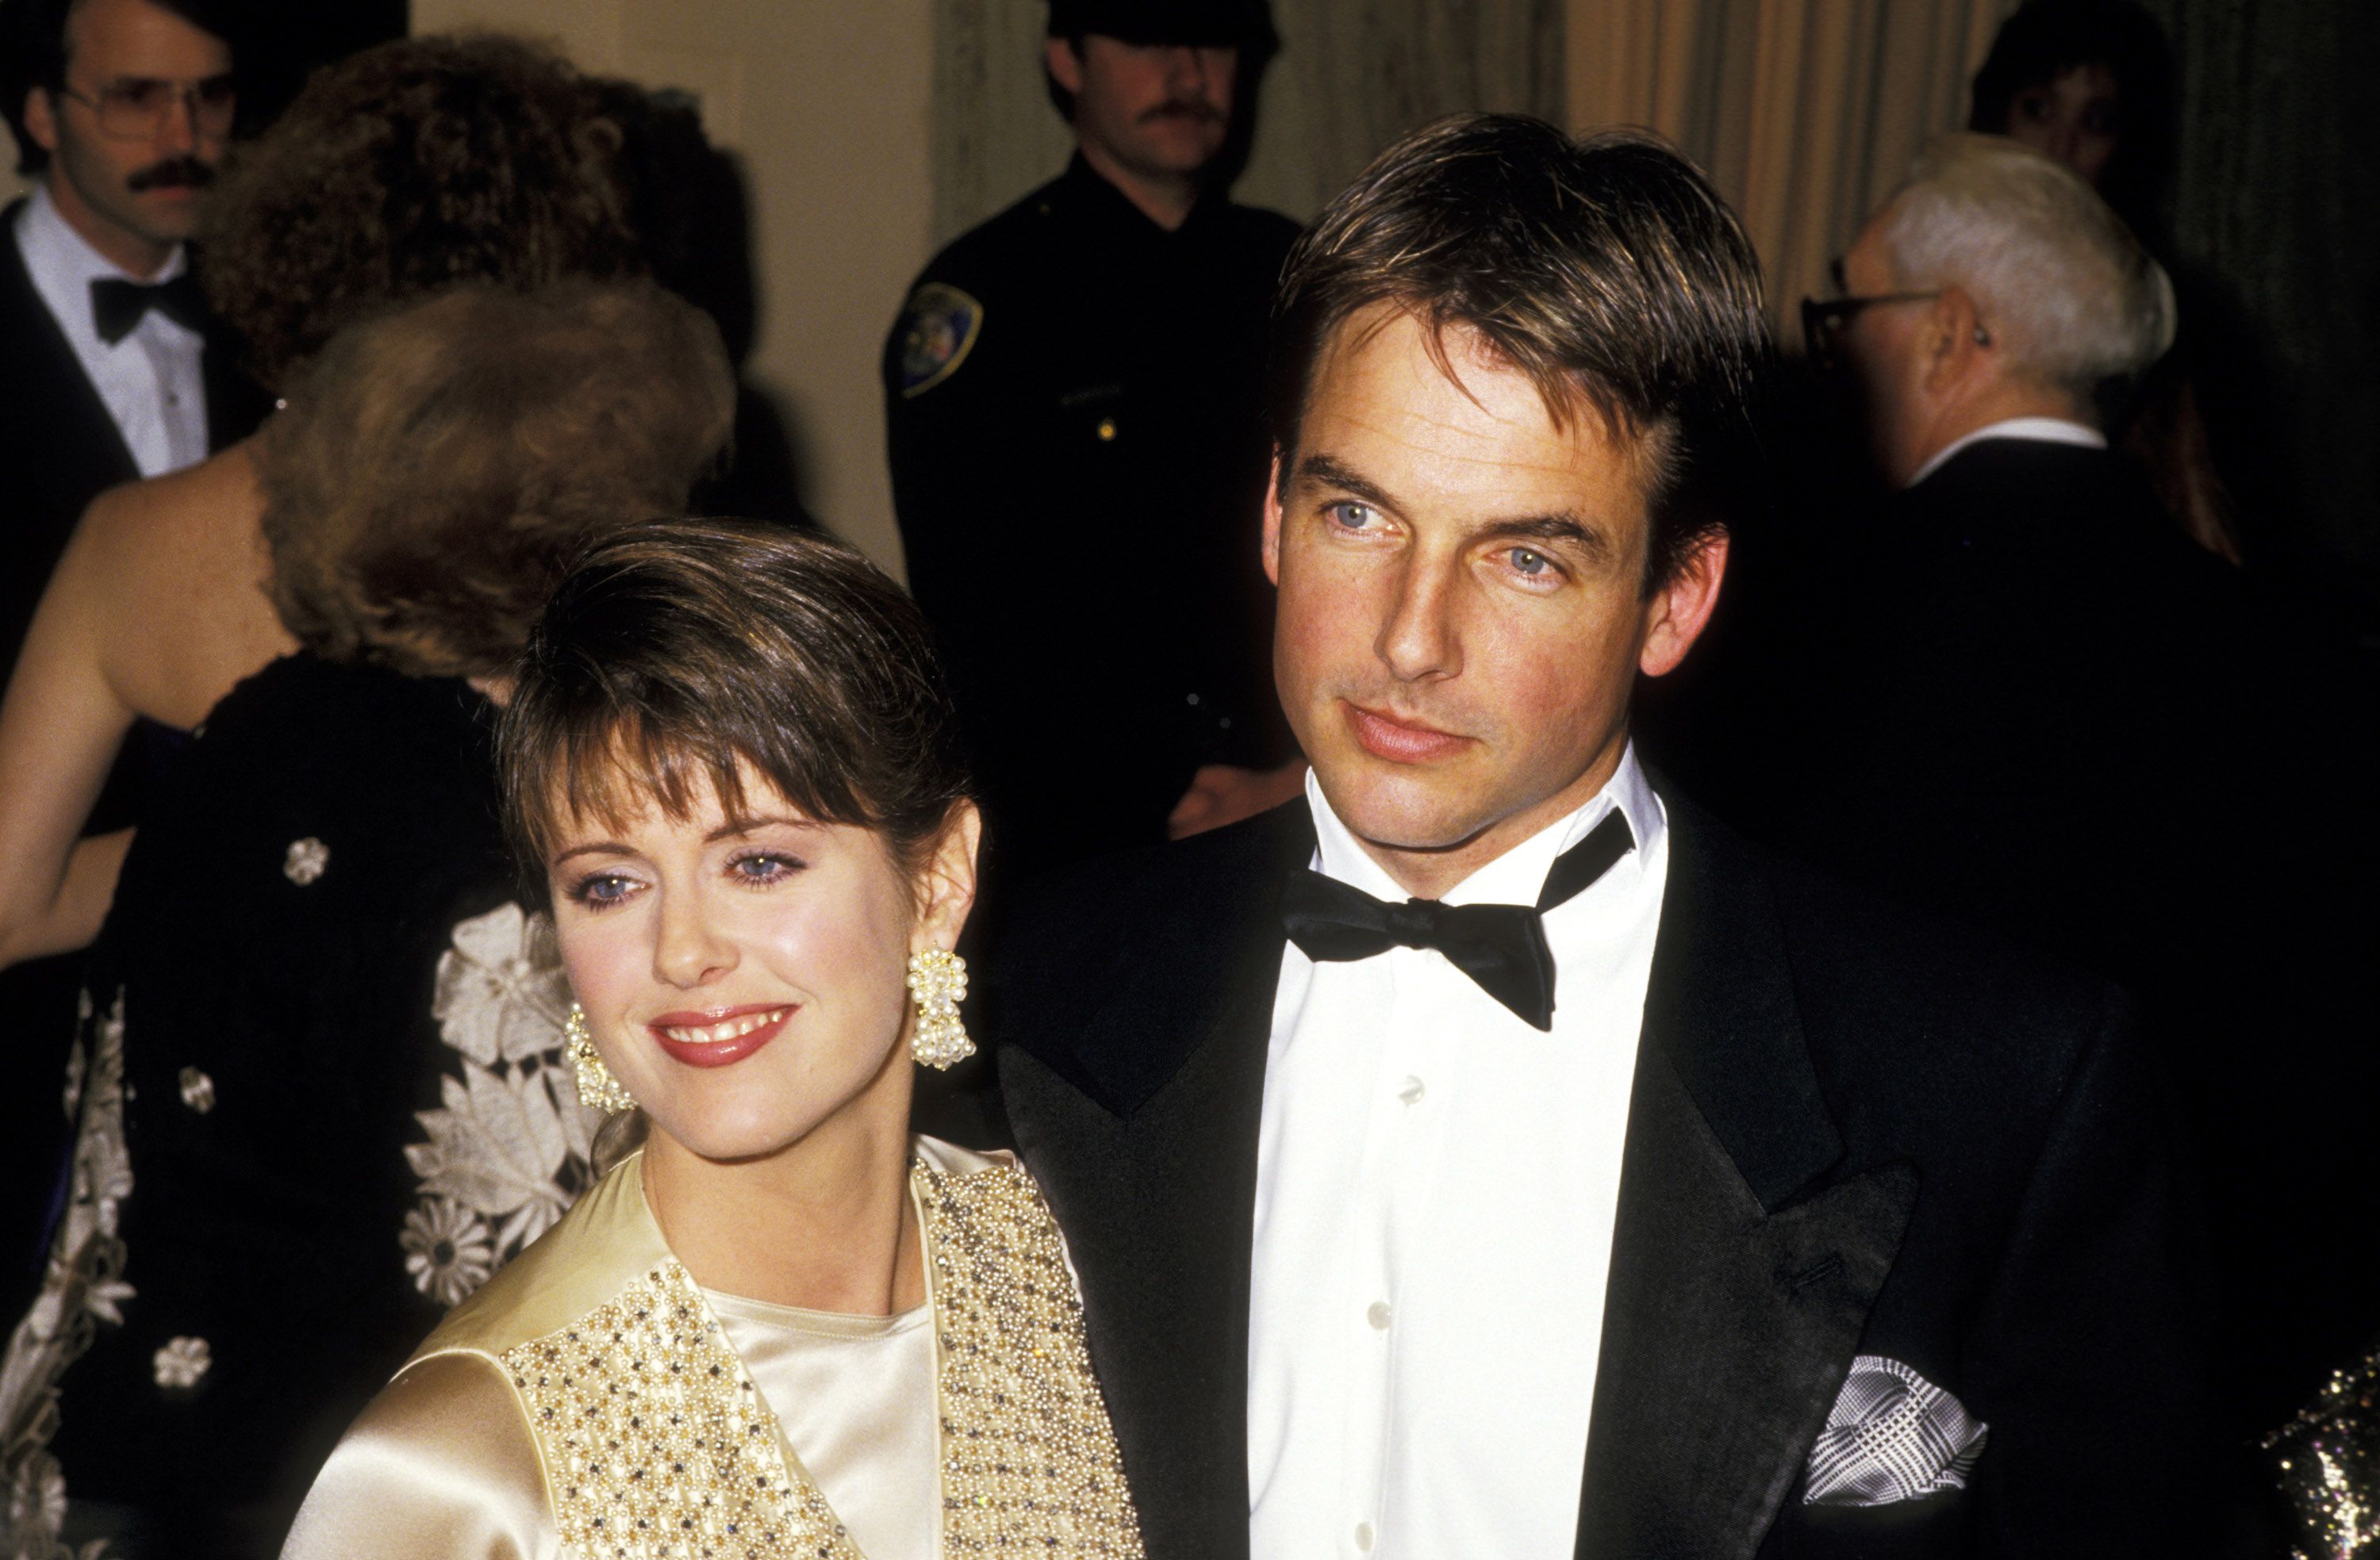 Pam Dawber and Mark Harmon circa 1990. | Source: Getty Images